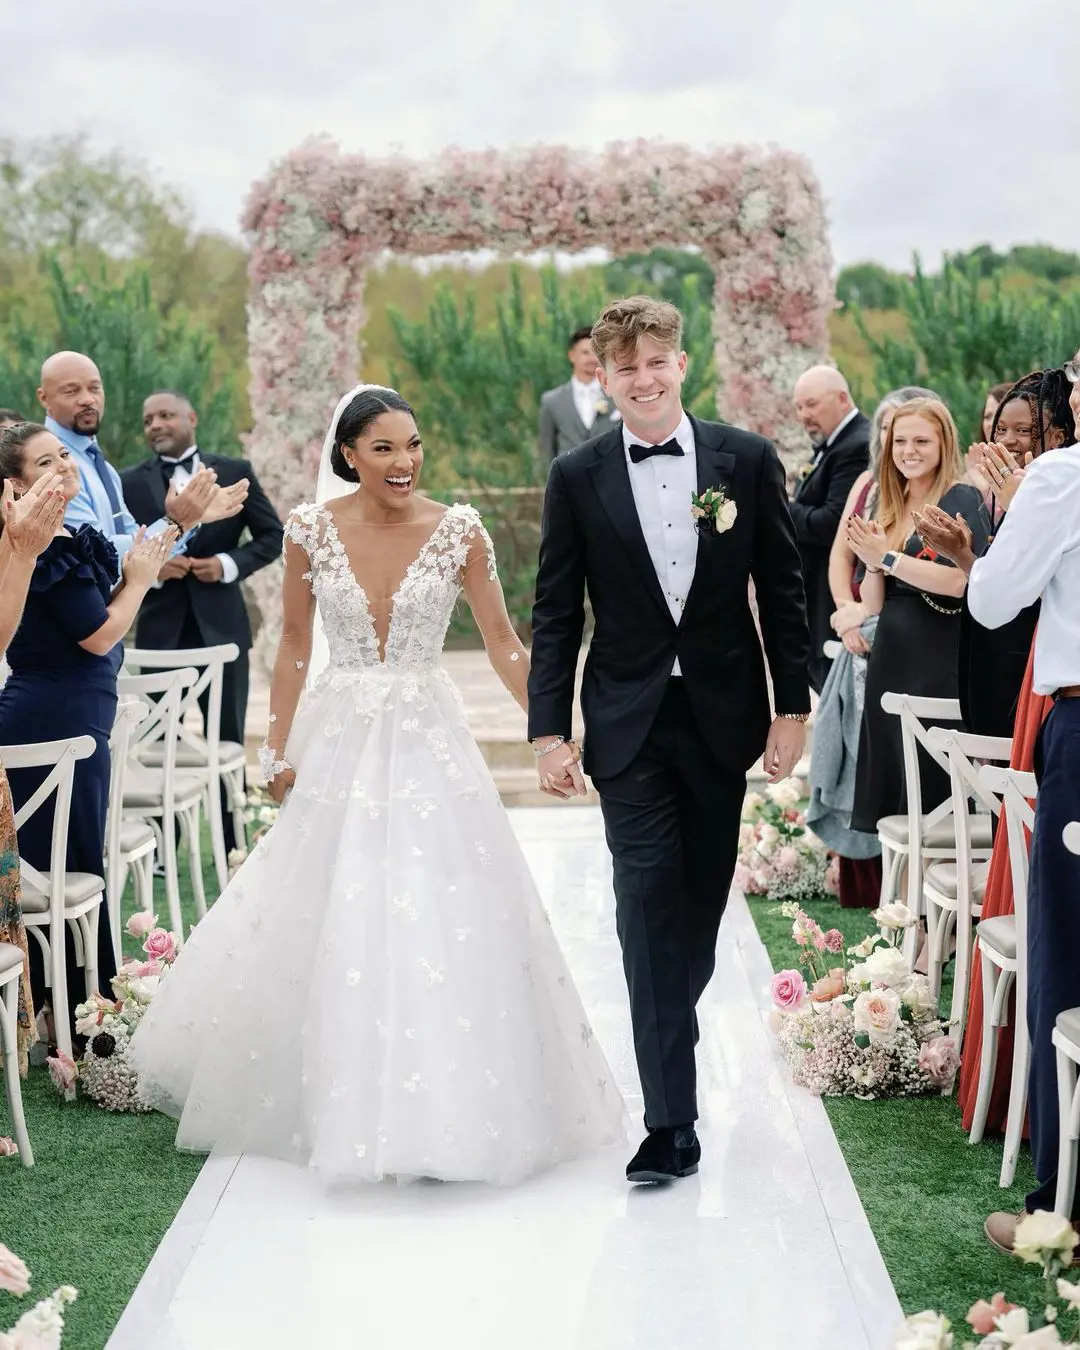 Hunter Woodhall walked down the aisle with Tara Davis in October 2022.